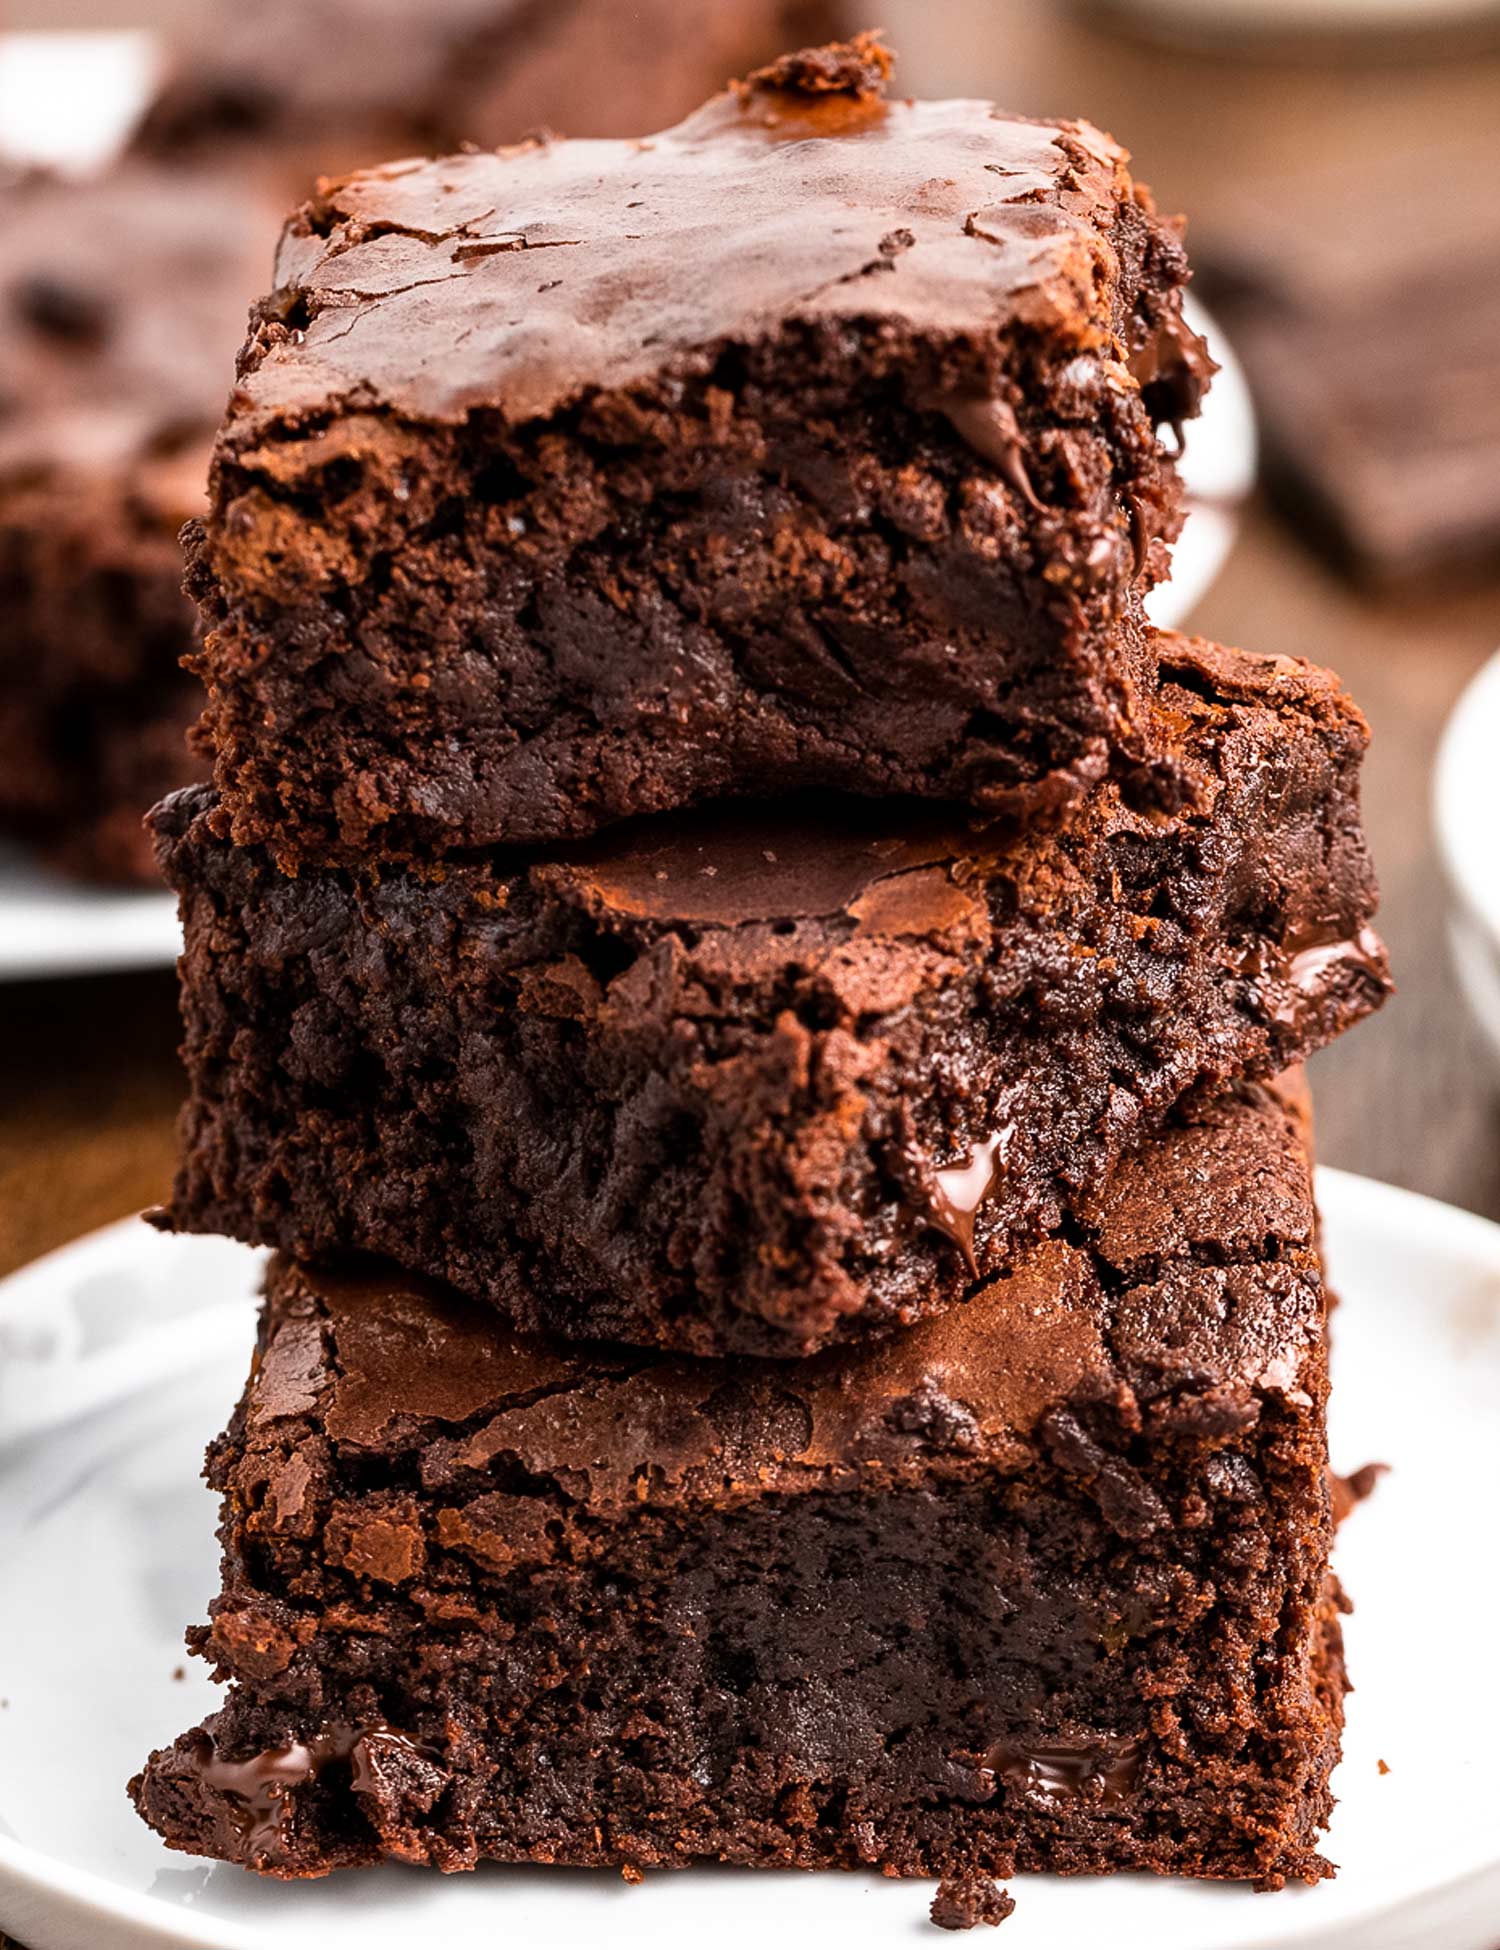 https://www.thechunkychef.com/wp-content/uploads/2021/02/Classic-Fudgy-Brownies-feat.jpg